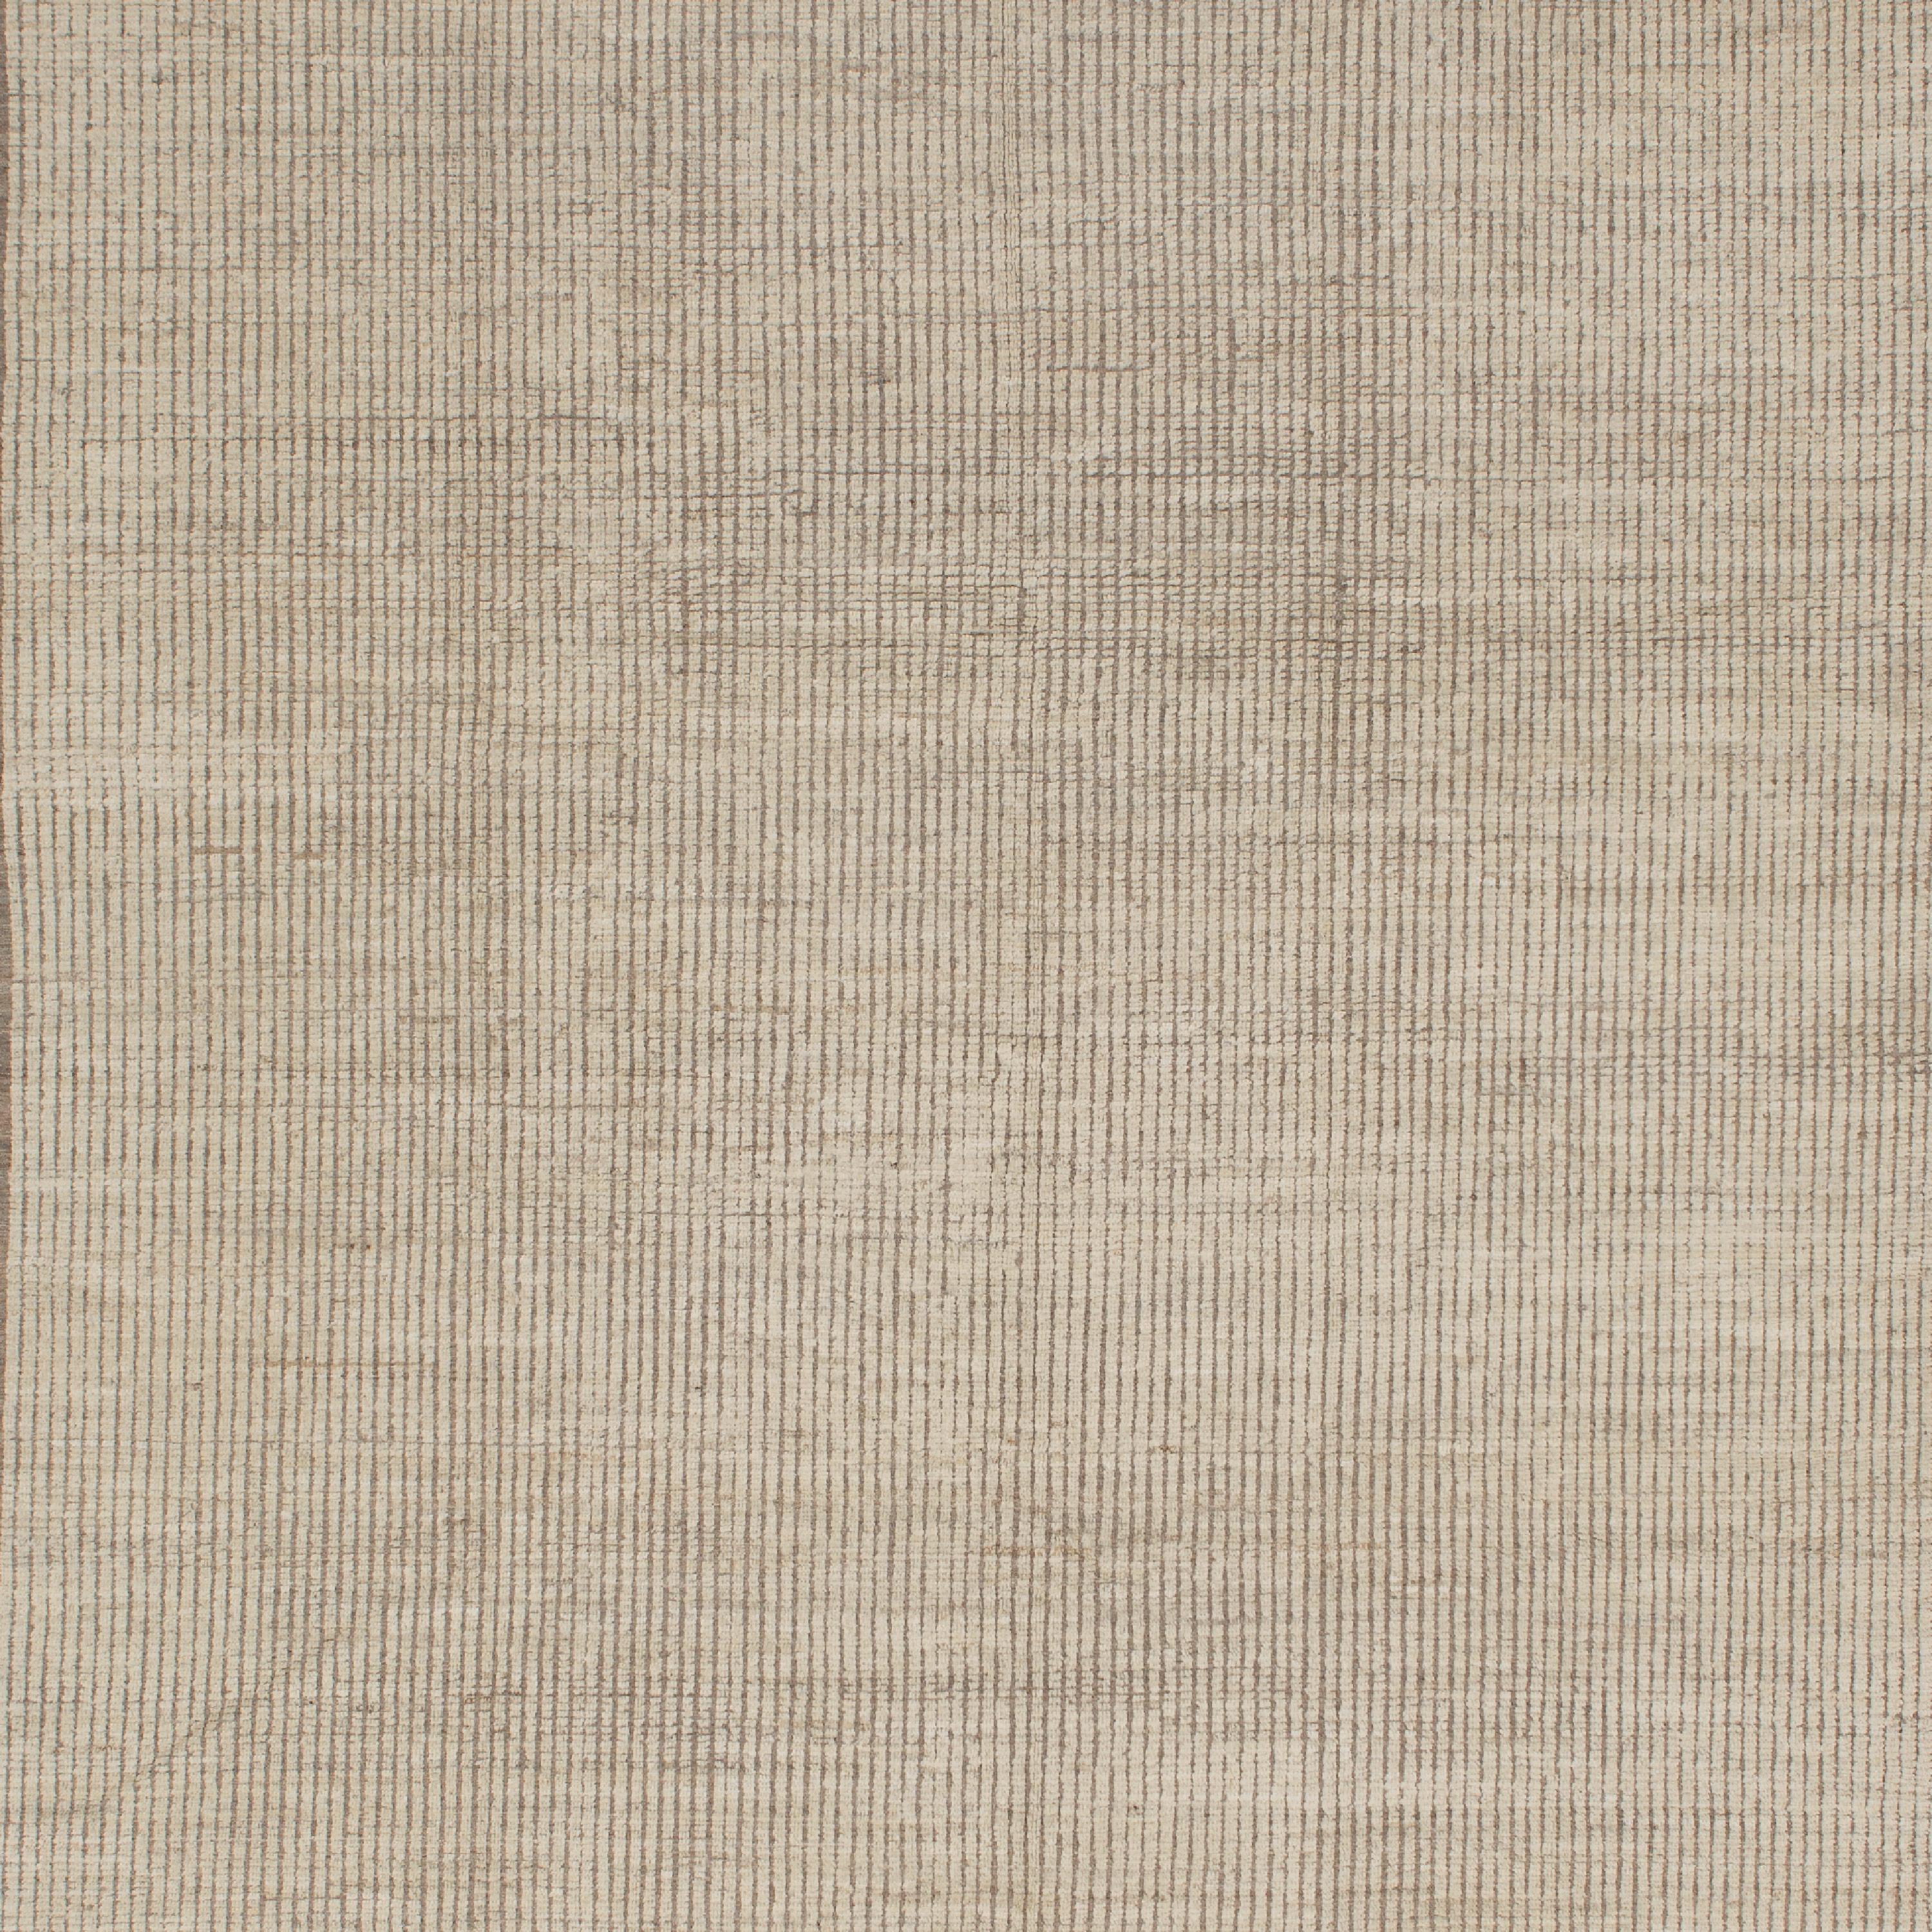 Inspired by the grounding foundations of Earth's natural colors and pure materials, this Cream Zameen Transitional Wool Rug - 9'4